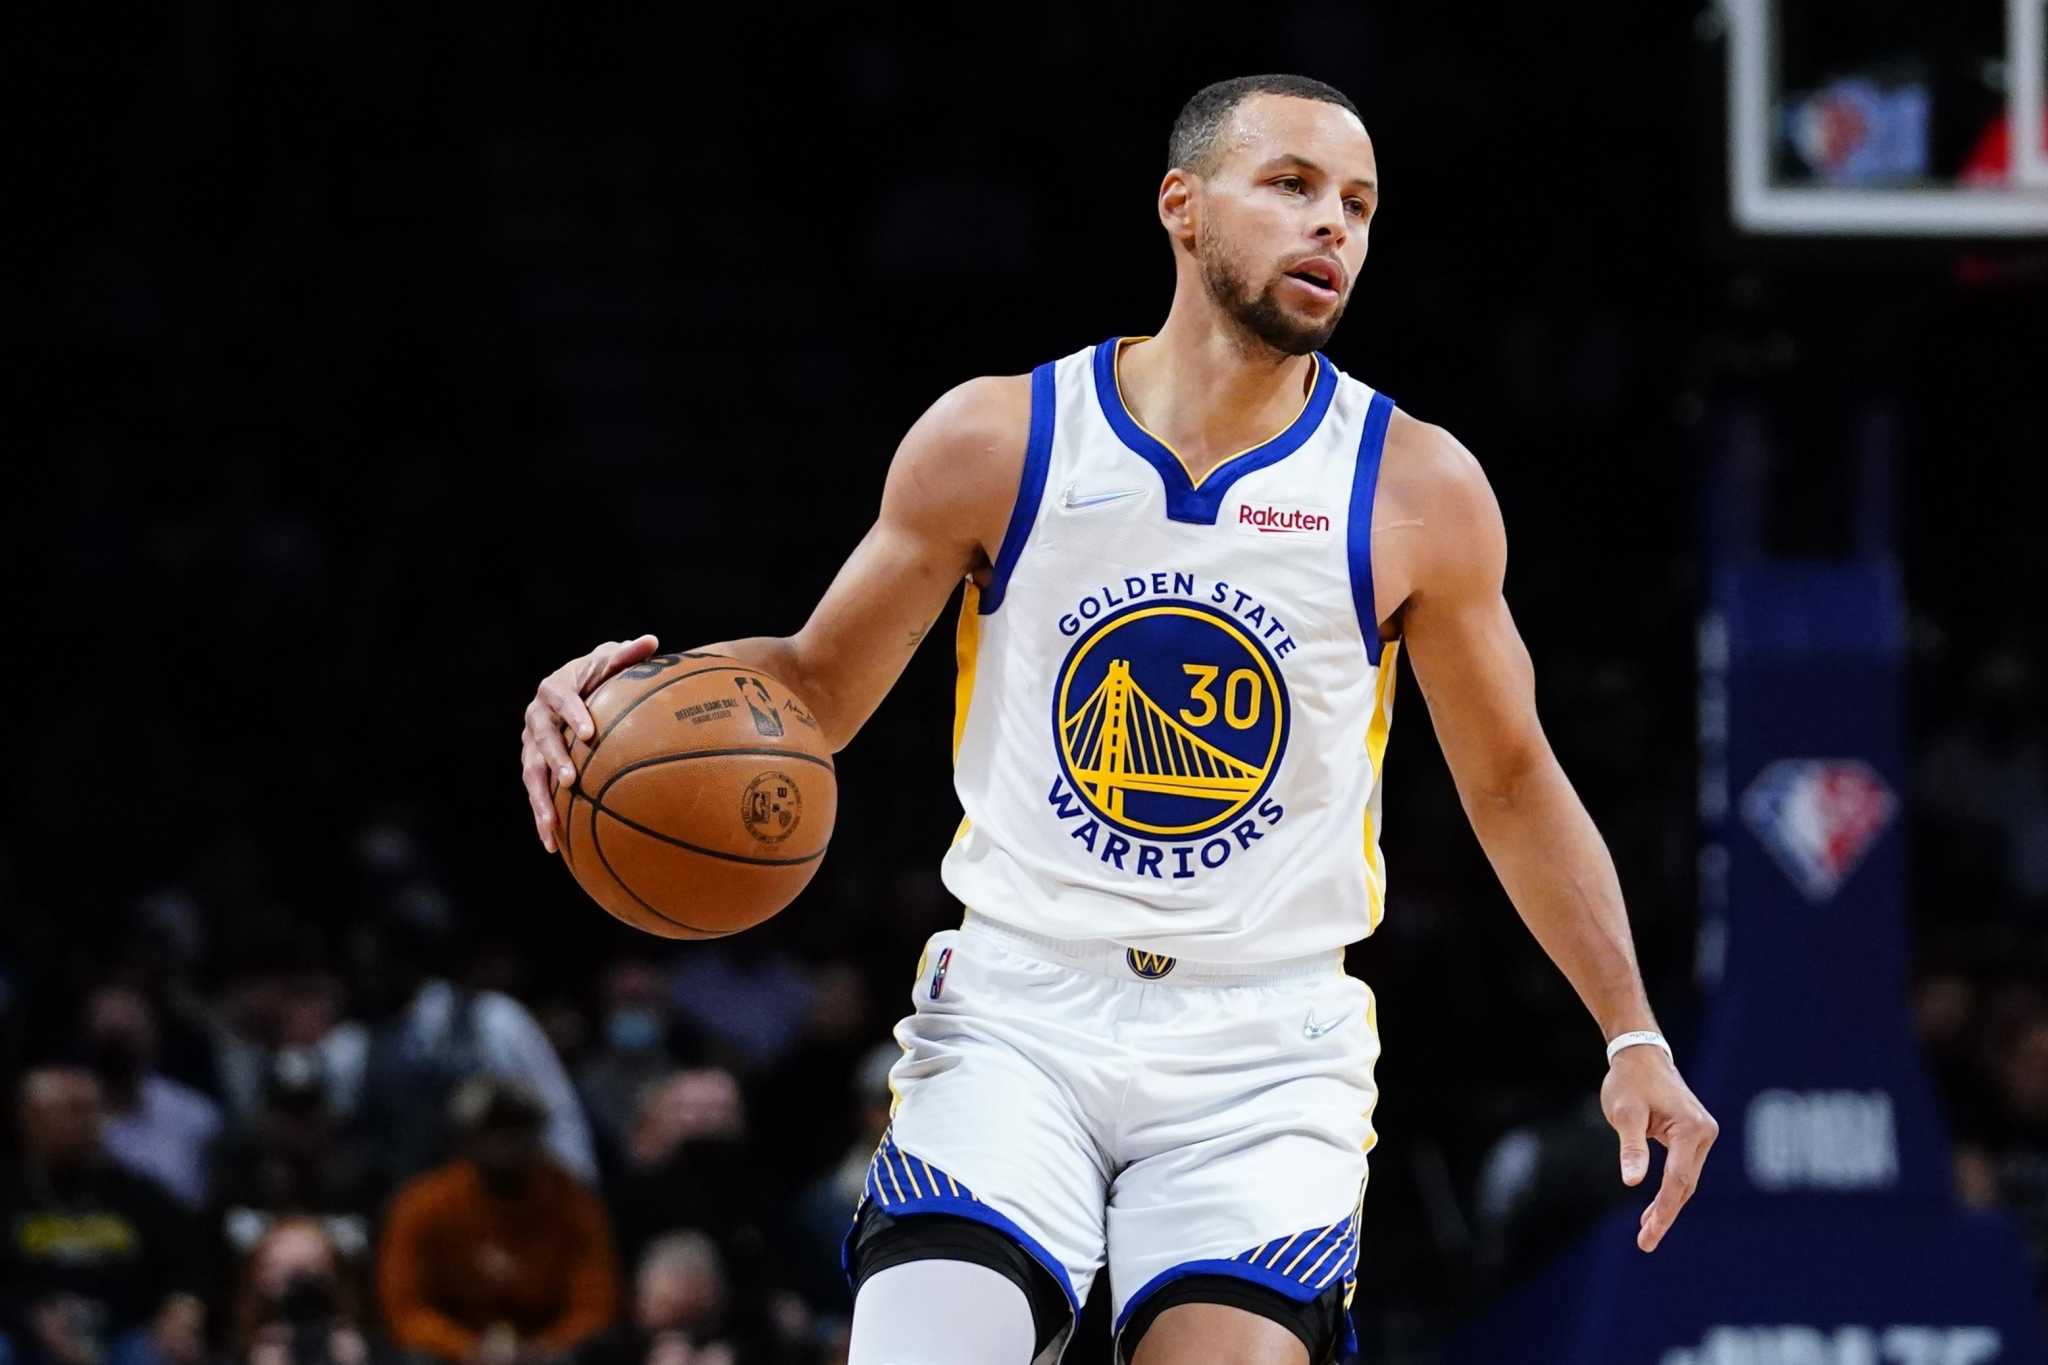 Illegally Smooth”: Warriors' Stephen Curry Showing Off “World Cup